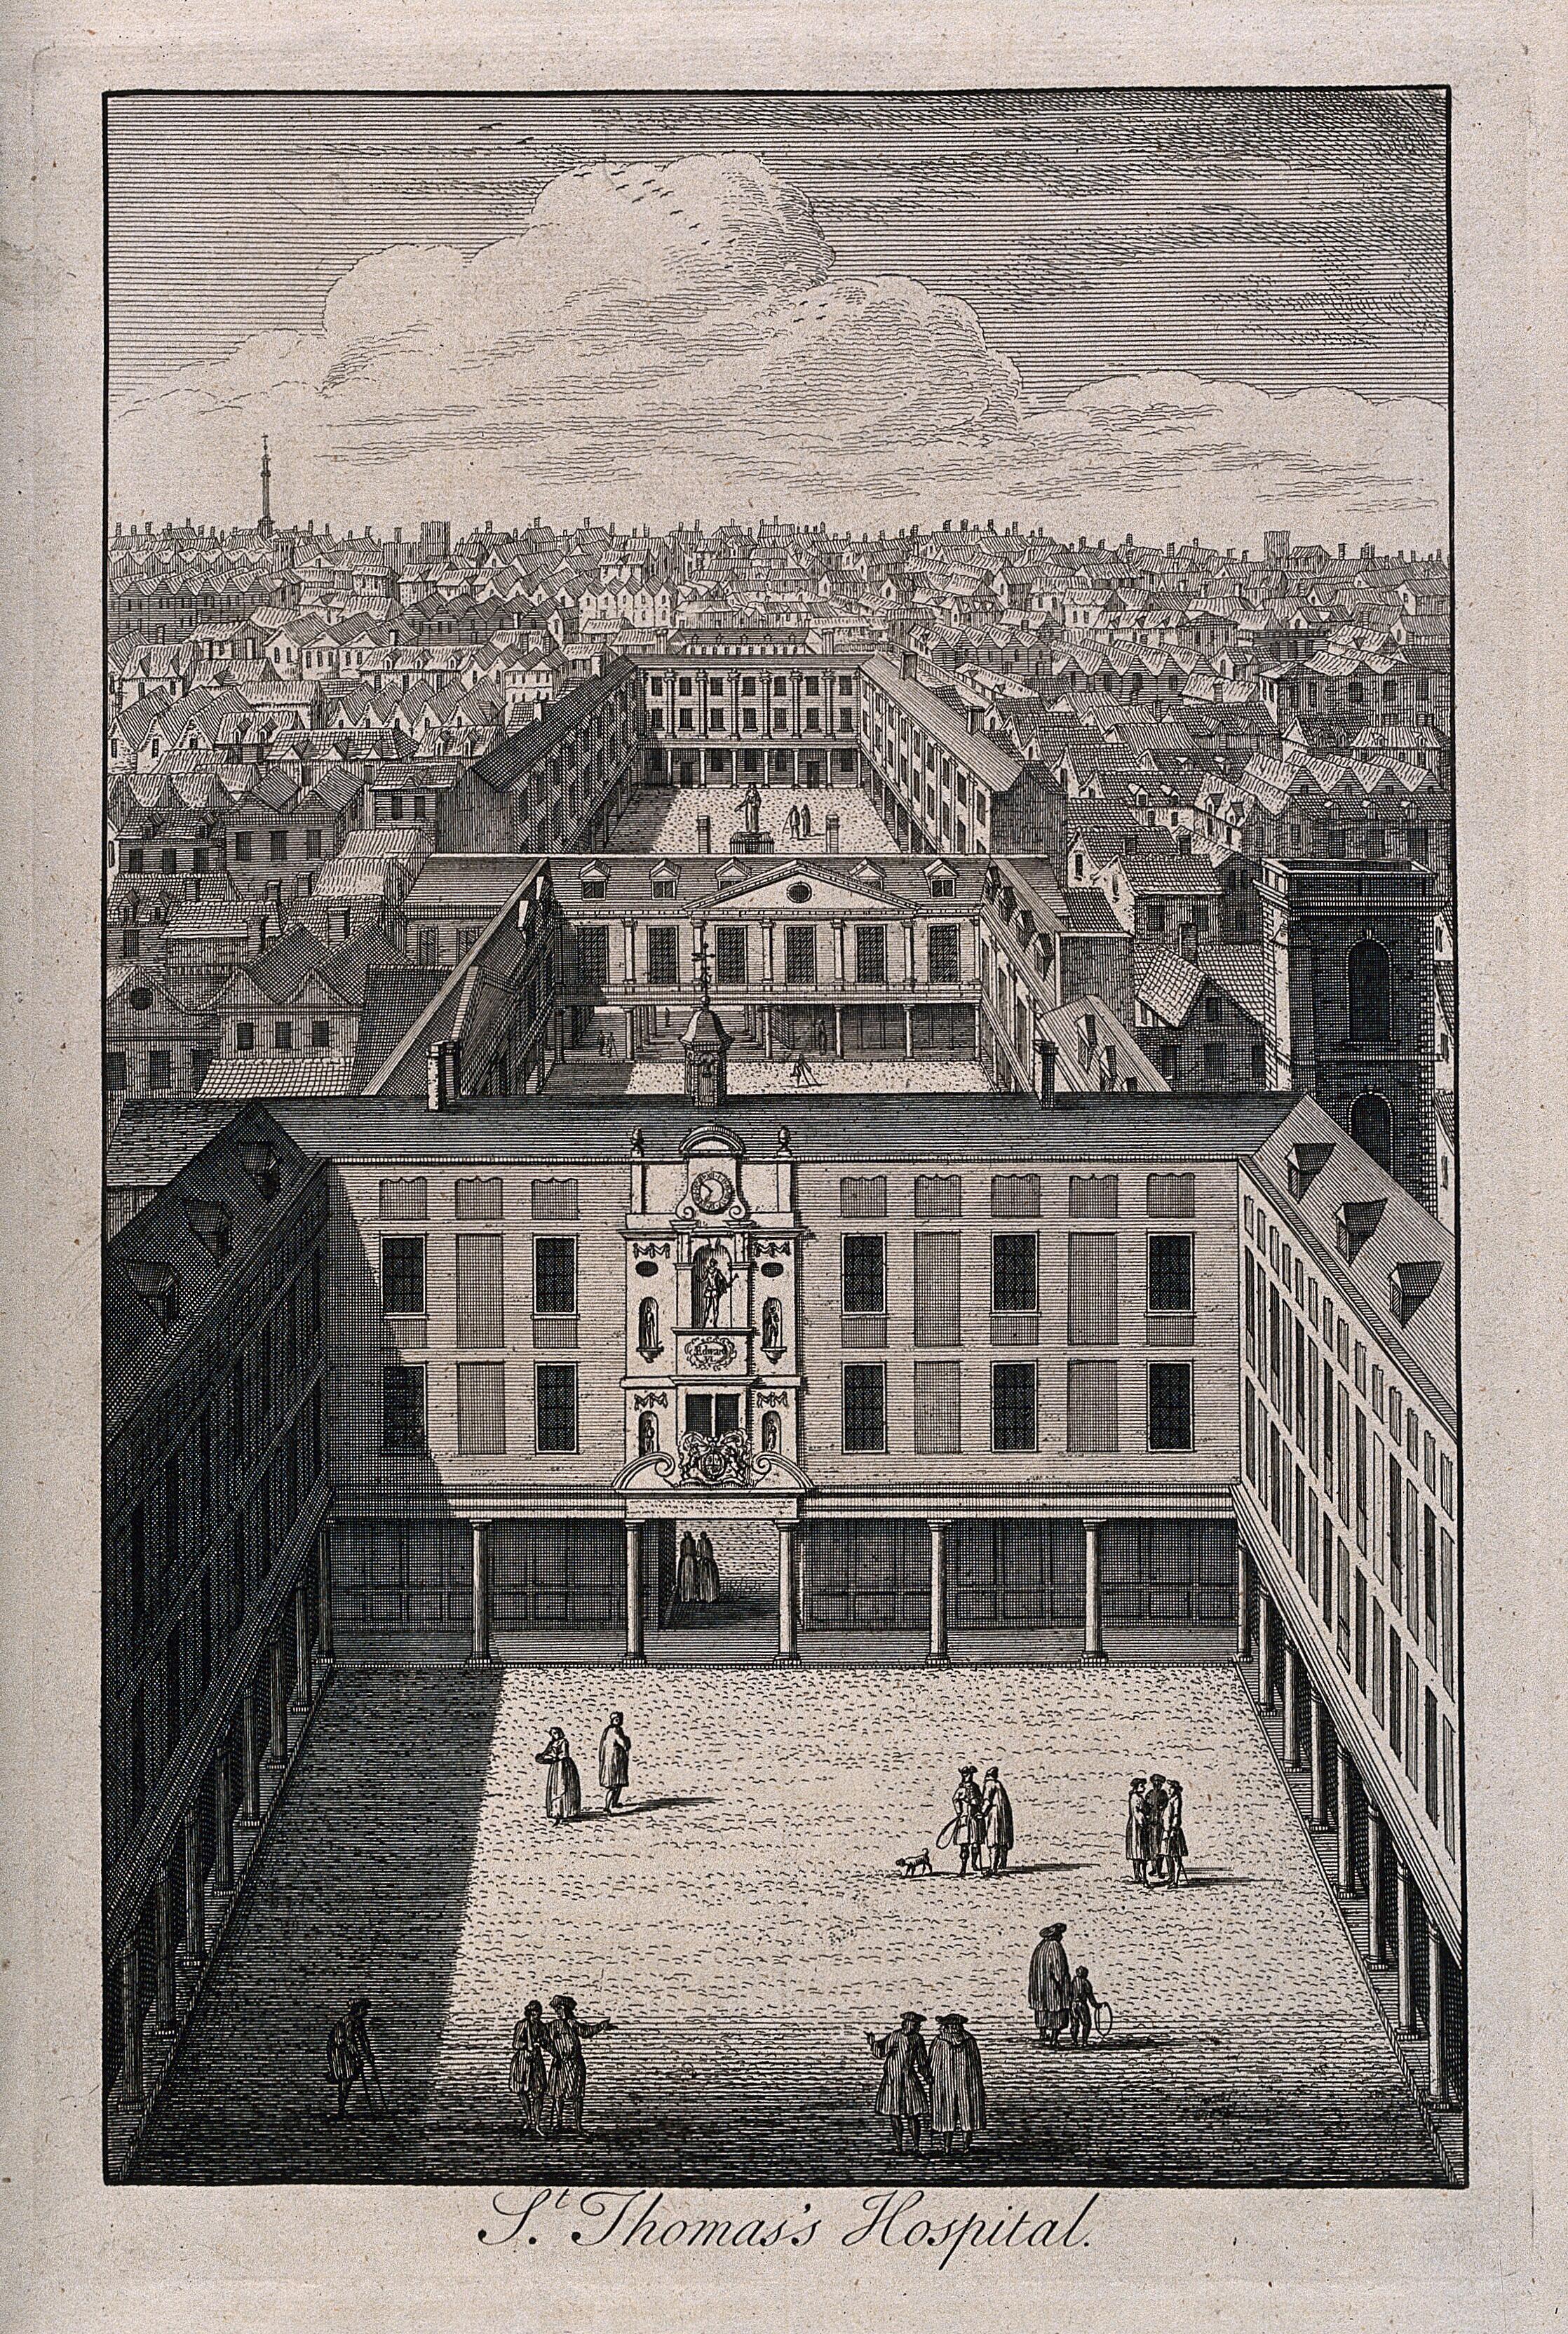 Eighteenth-century engraving of St. Thomas Hospital by W. H. Toms. Image courtesy of the Welcome Collection.